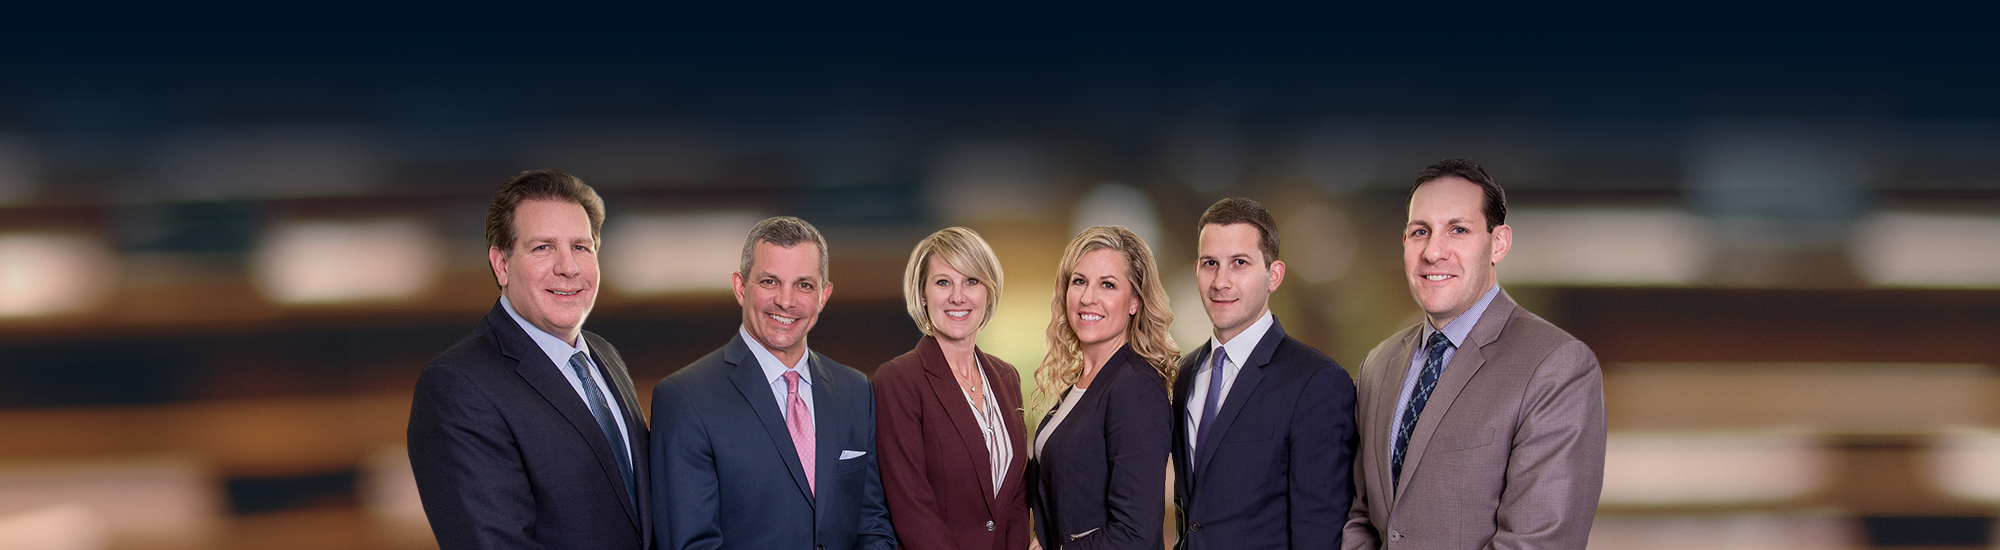 Attorneys from Silverman Thompson